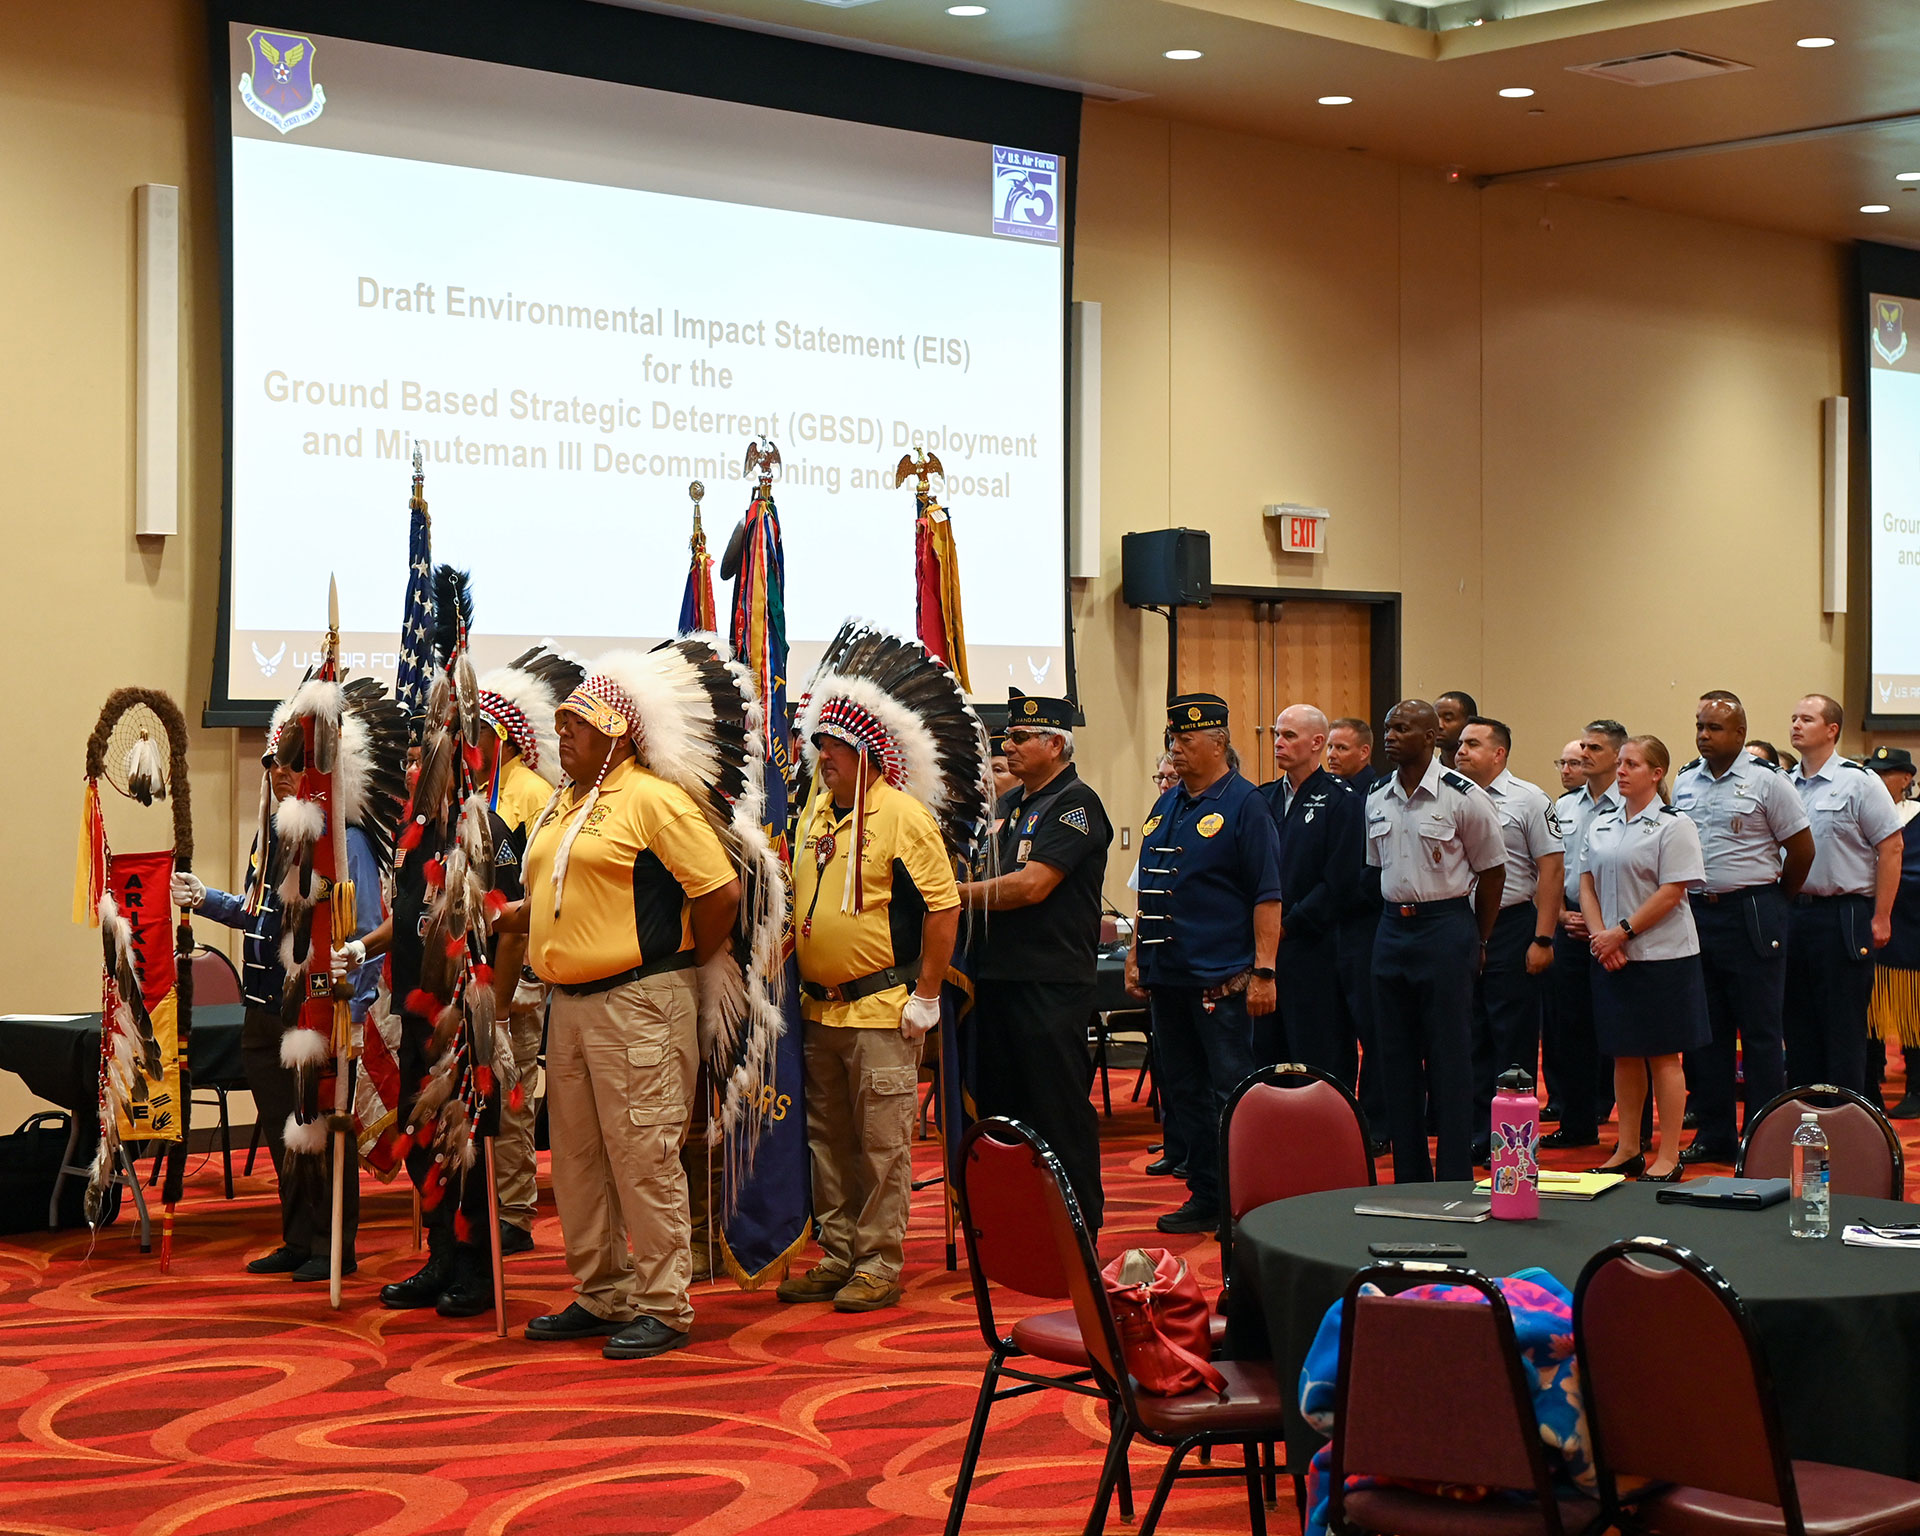 The US Air Force presents the Draft Environmental Impact Statement on the Fort Berthold Reservation New Town, ND. July 19, 2022. (U.S. Air Force photo by Senior Airman Evan J. Lichtenhan) 